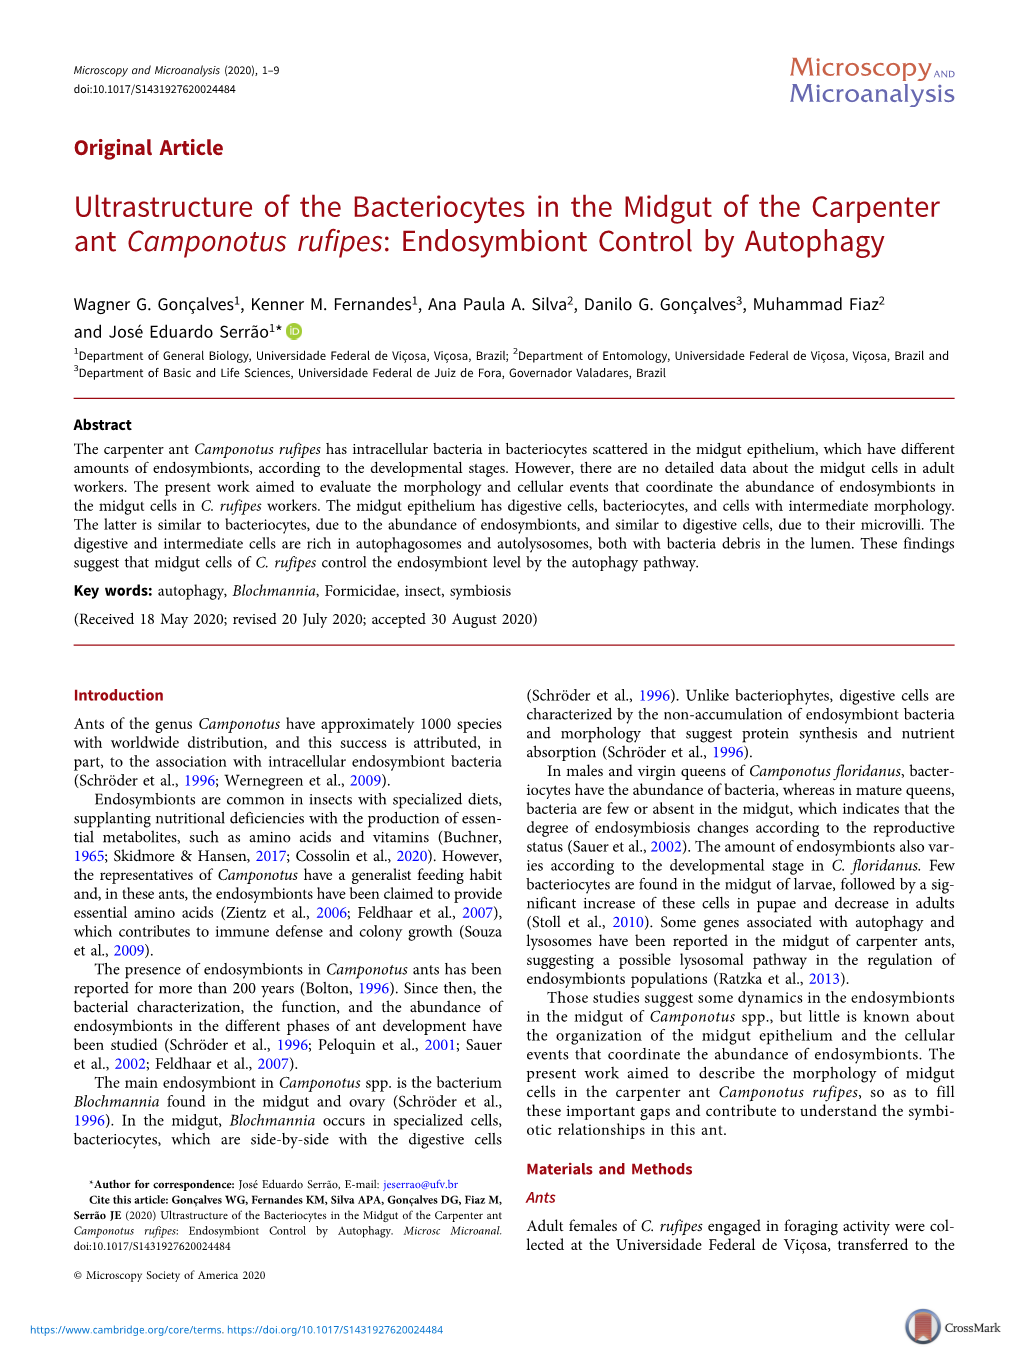 Ultrastructure of the Bacteriocytes in the Midgut of the Carpenter Ant Camponotus Rufipes: Endosymbiont Control by Autophagy